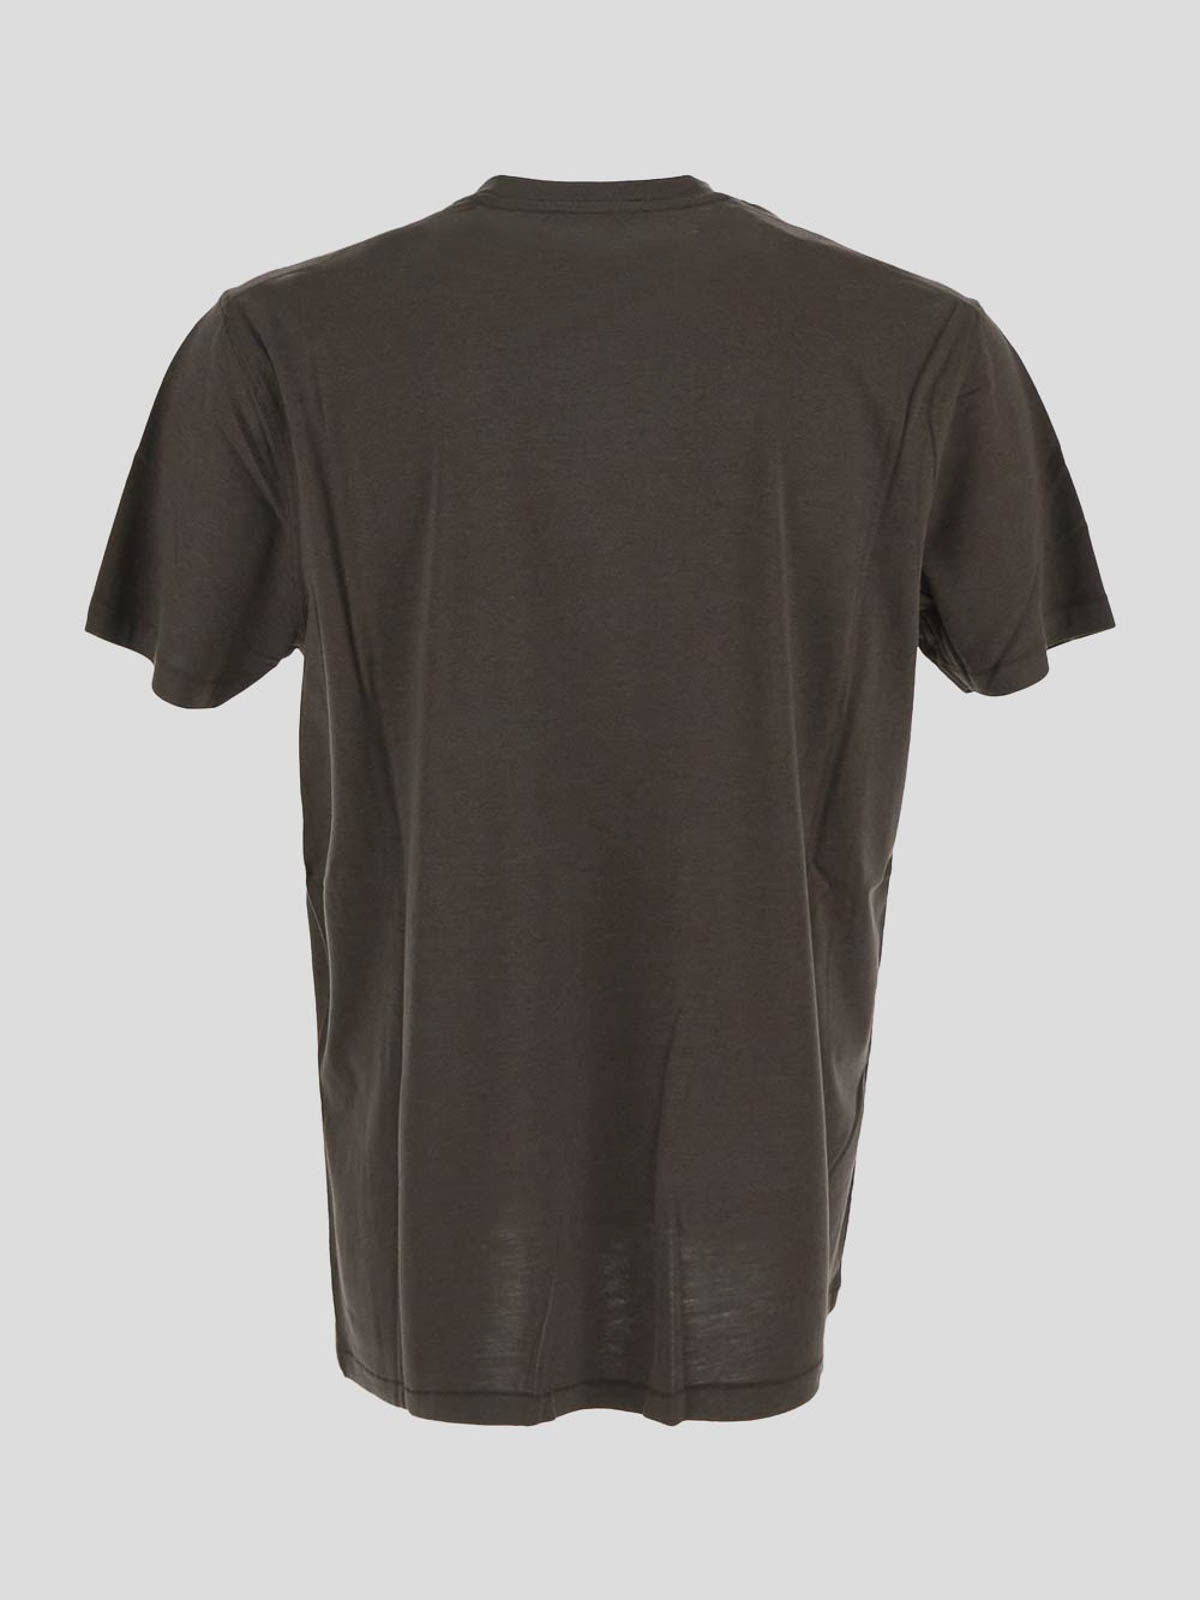 Shop Tom Ford Brown T-shirt With Short Sleeves